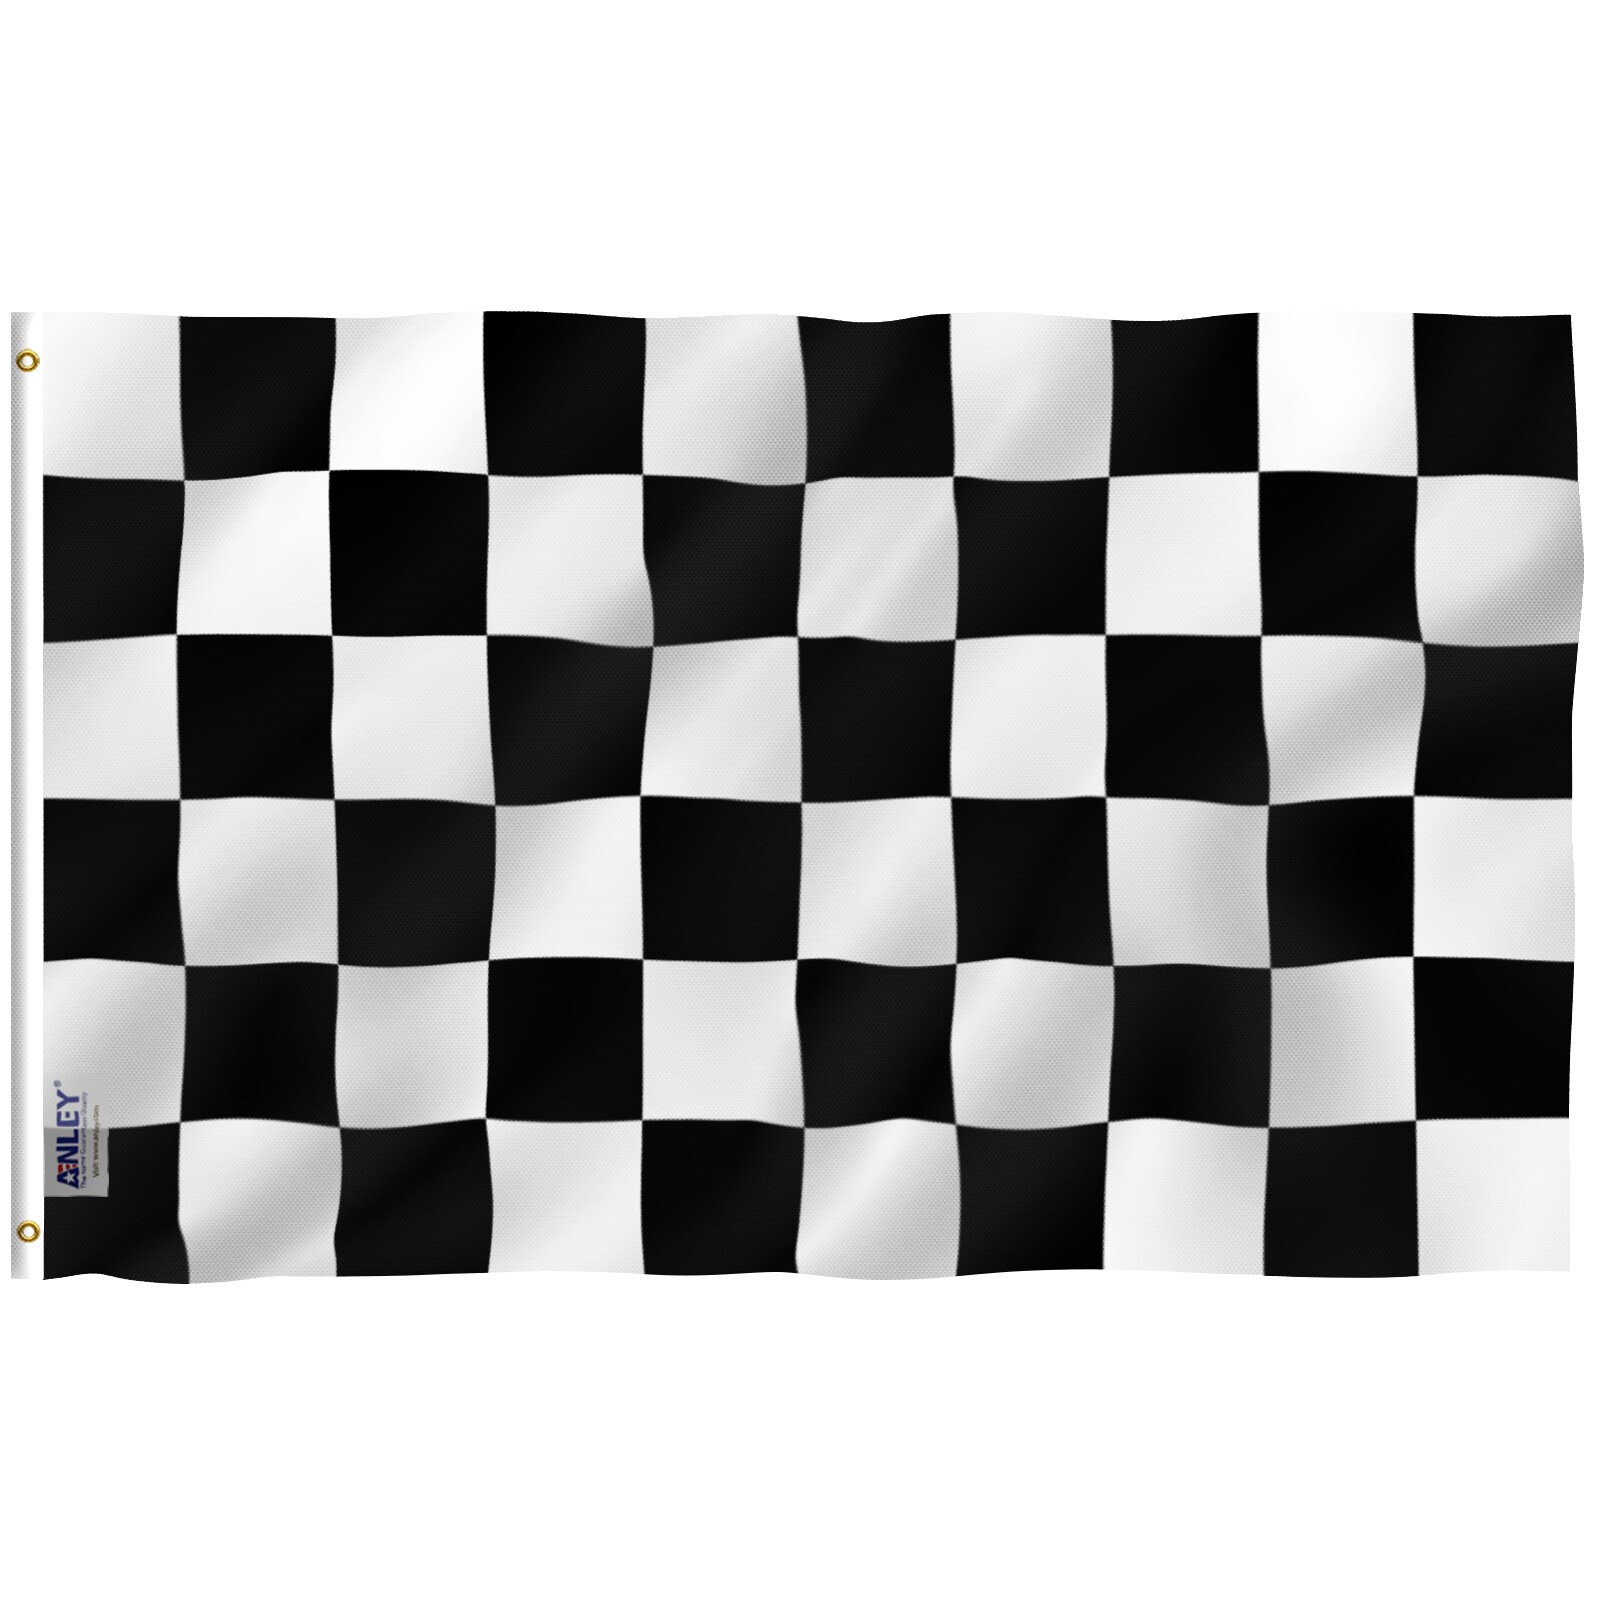 One Hundred 100 5 1/2"x7" Checker Racing Hand Flags 